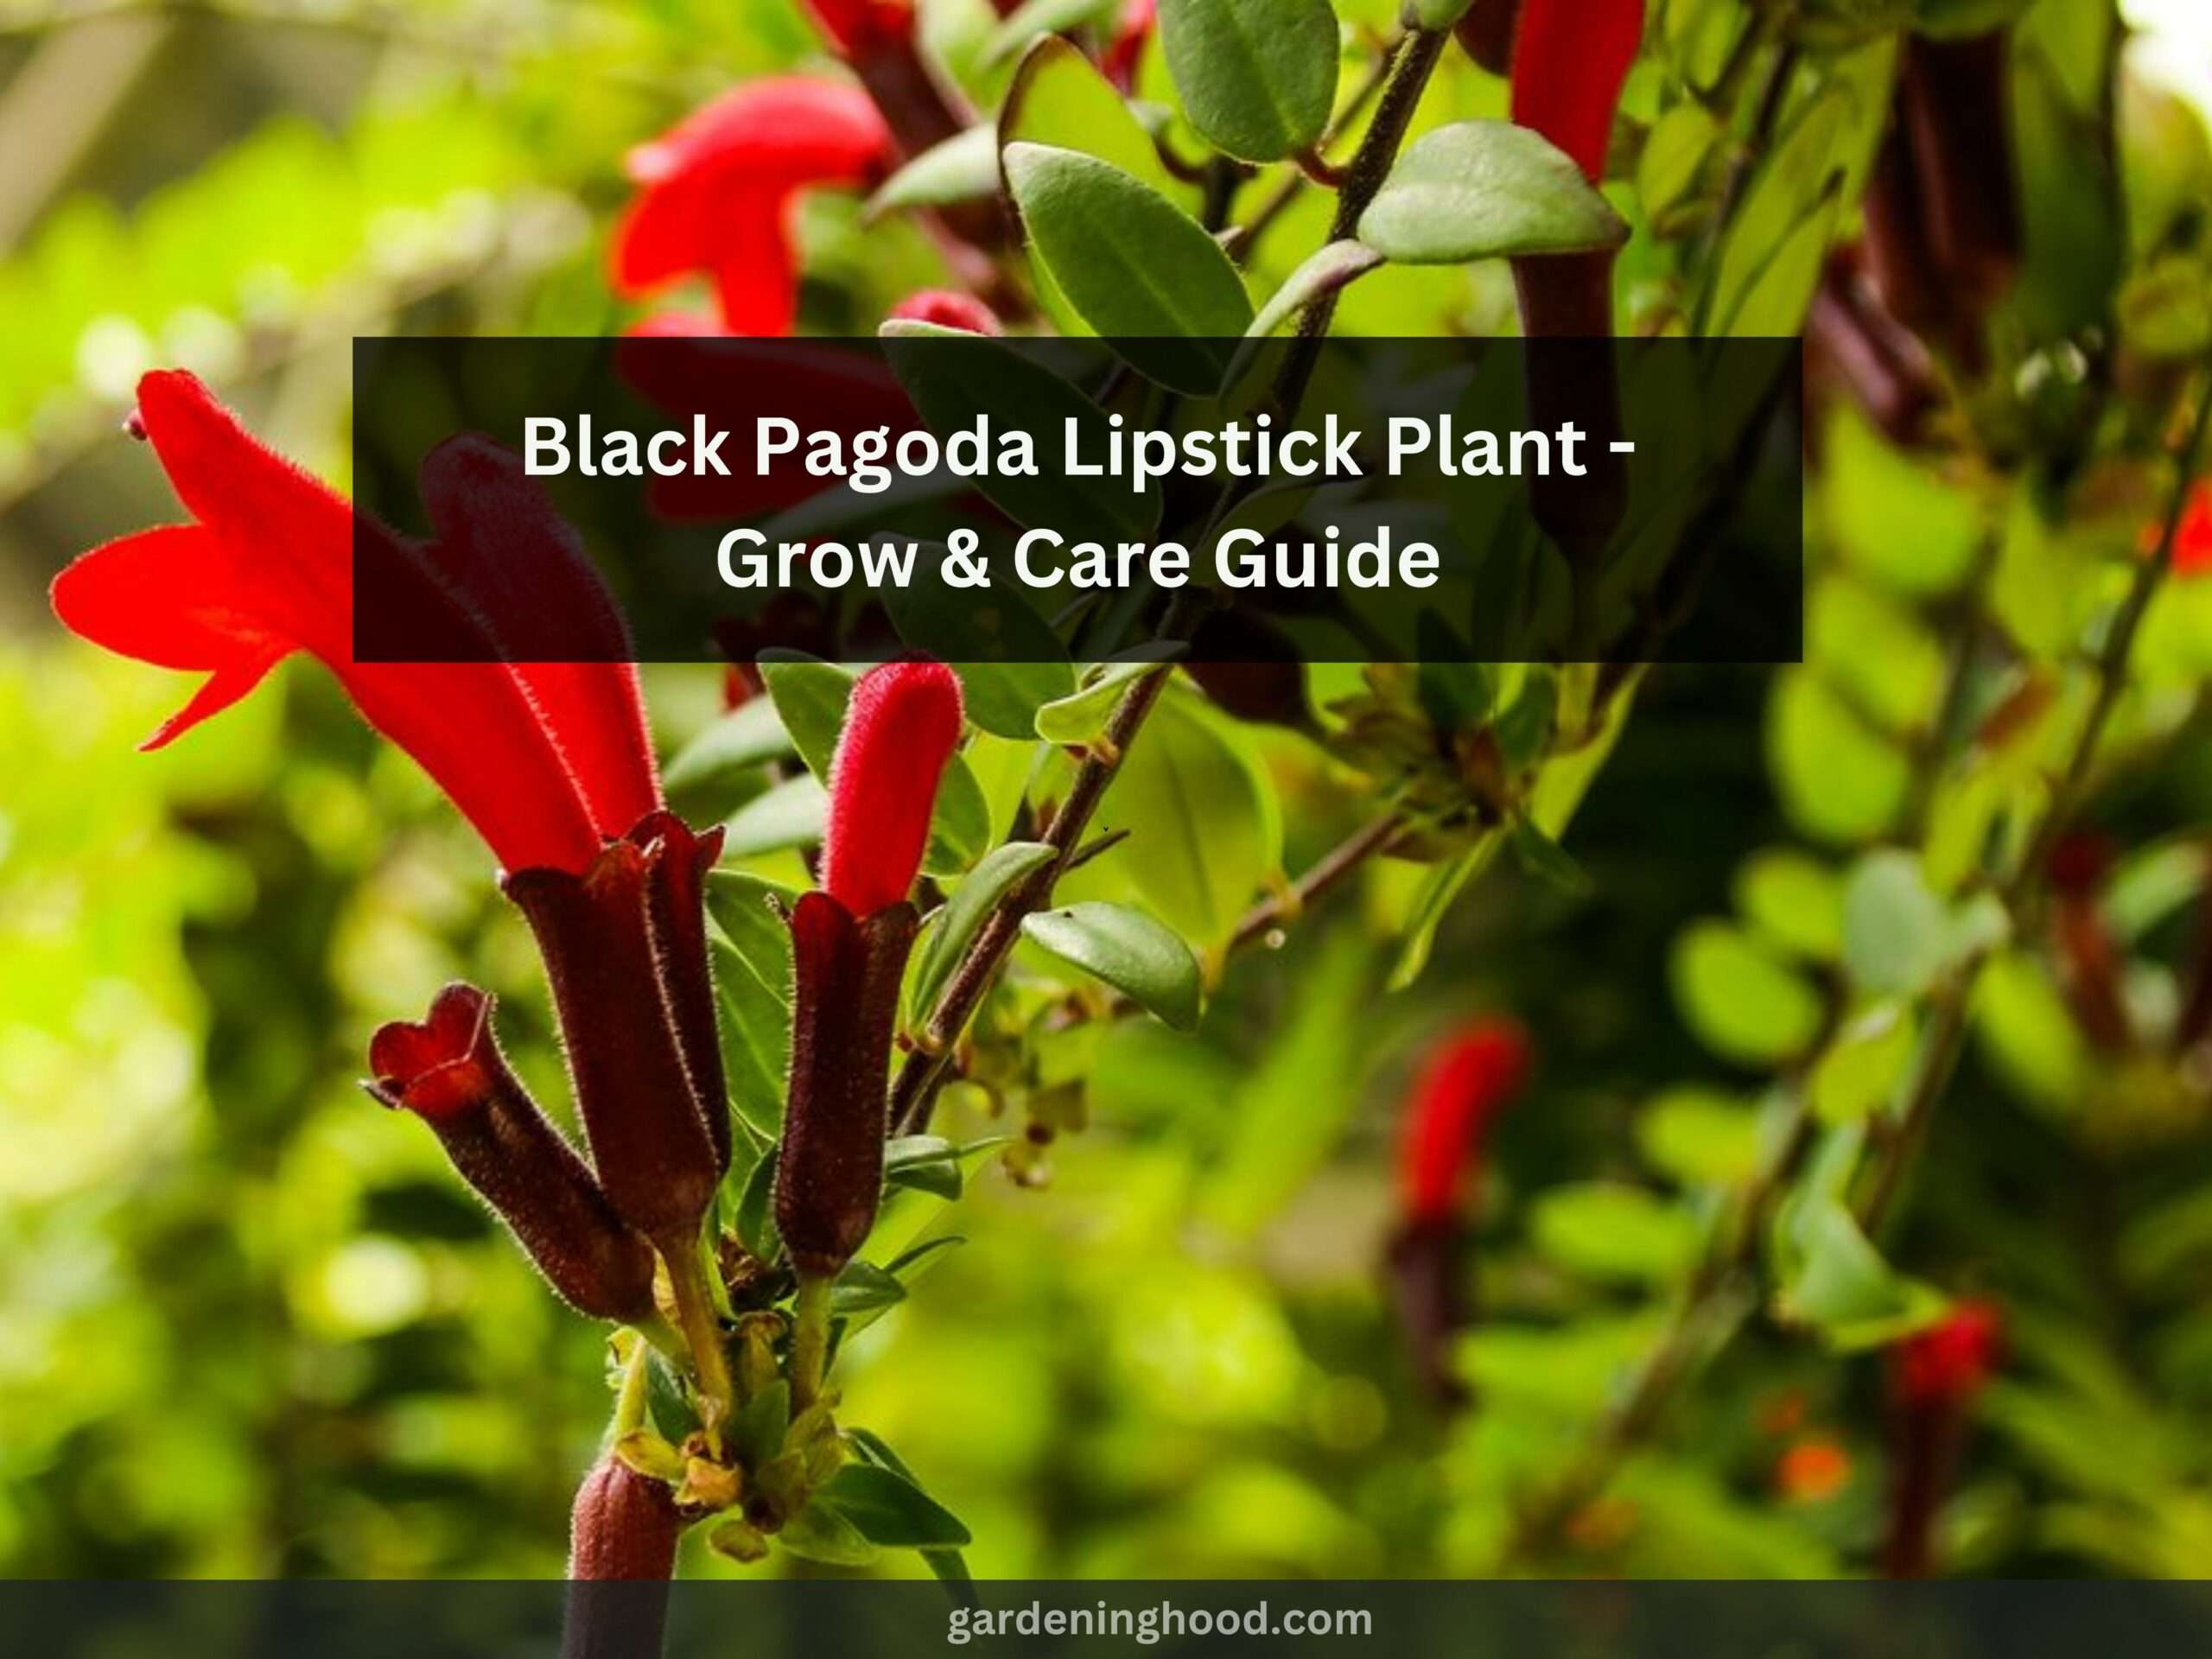 The Ultimate Guide to the Growth and Care of the Black Pagoda Lipstick Plant